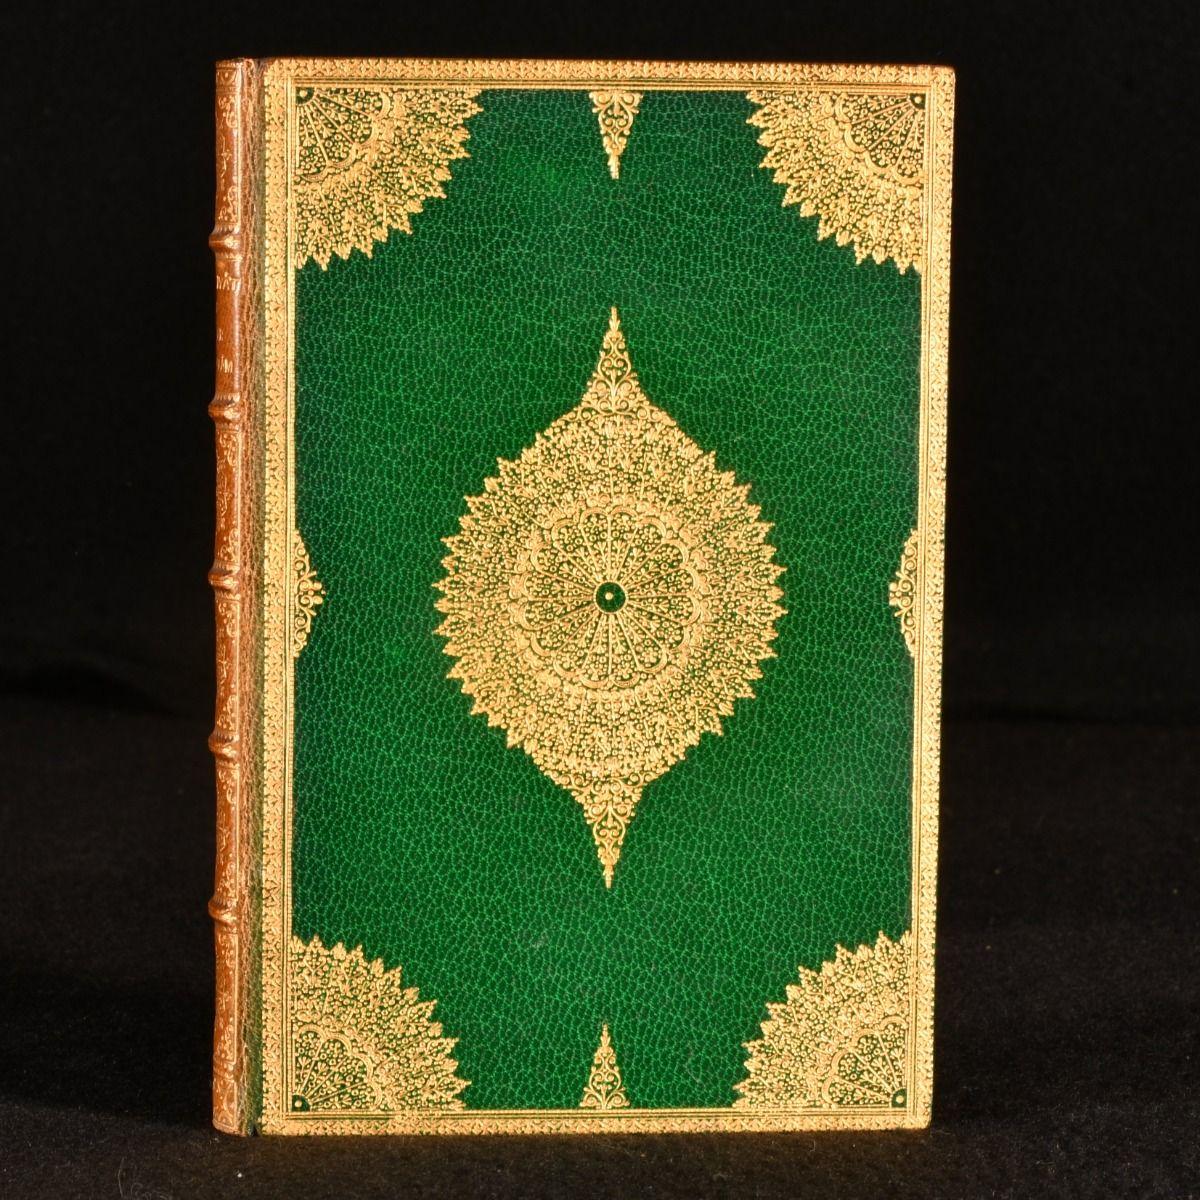 A sumptuously bound copy of this noted work, presented here in a highly decorative Bumpus binding, with exquisite gilt detail and watered silk pastedowns.

The 1907 edition of the work. First published in this form by Quaritch in 1859.

Part of the